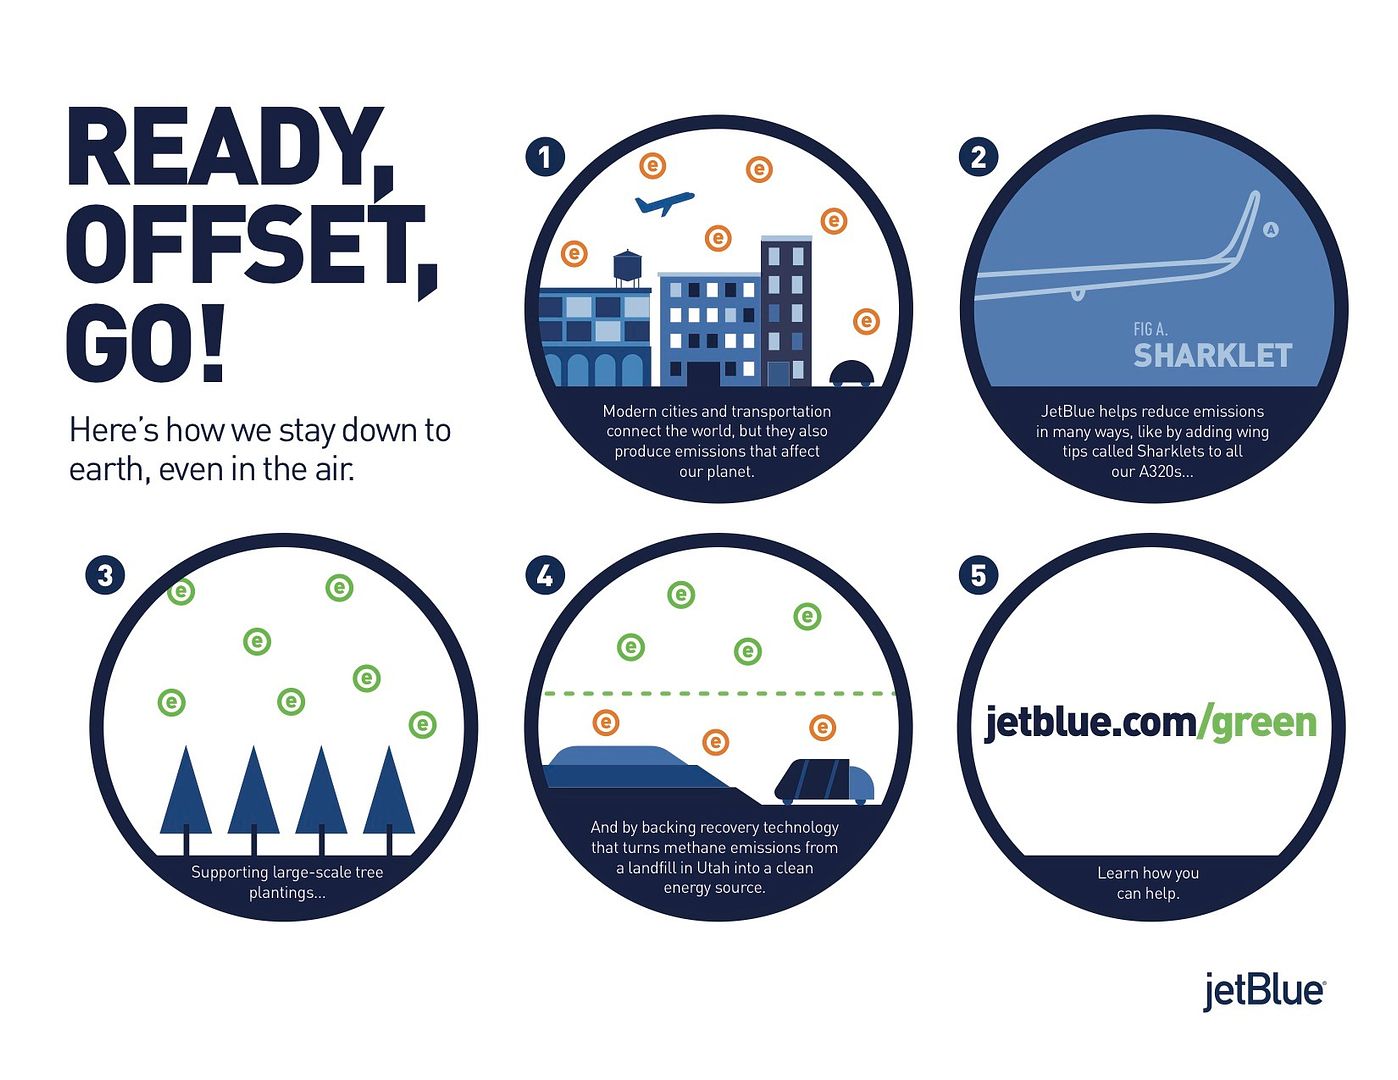 JetBlue has a huge commitment to sustainability, including comprehensive offset programs